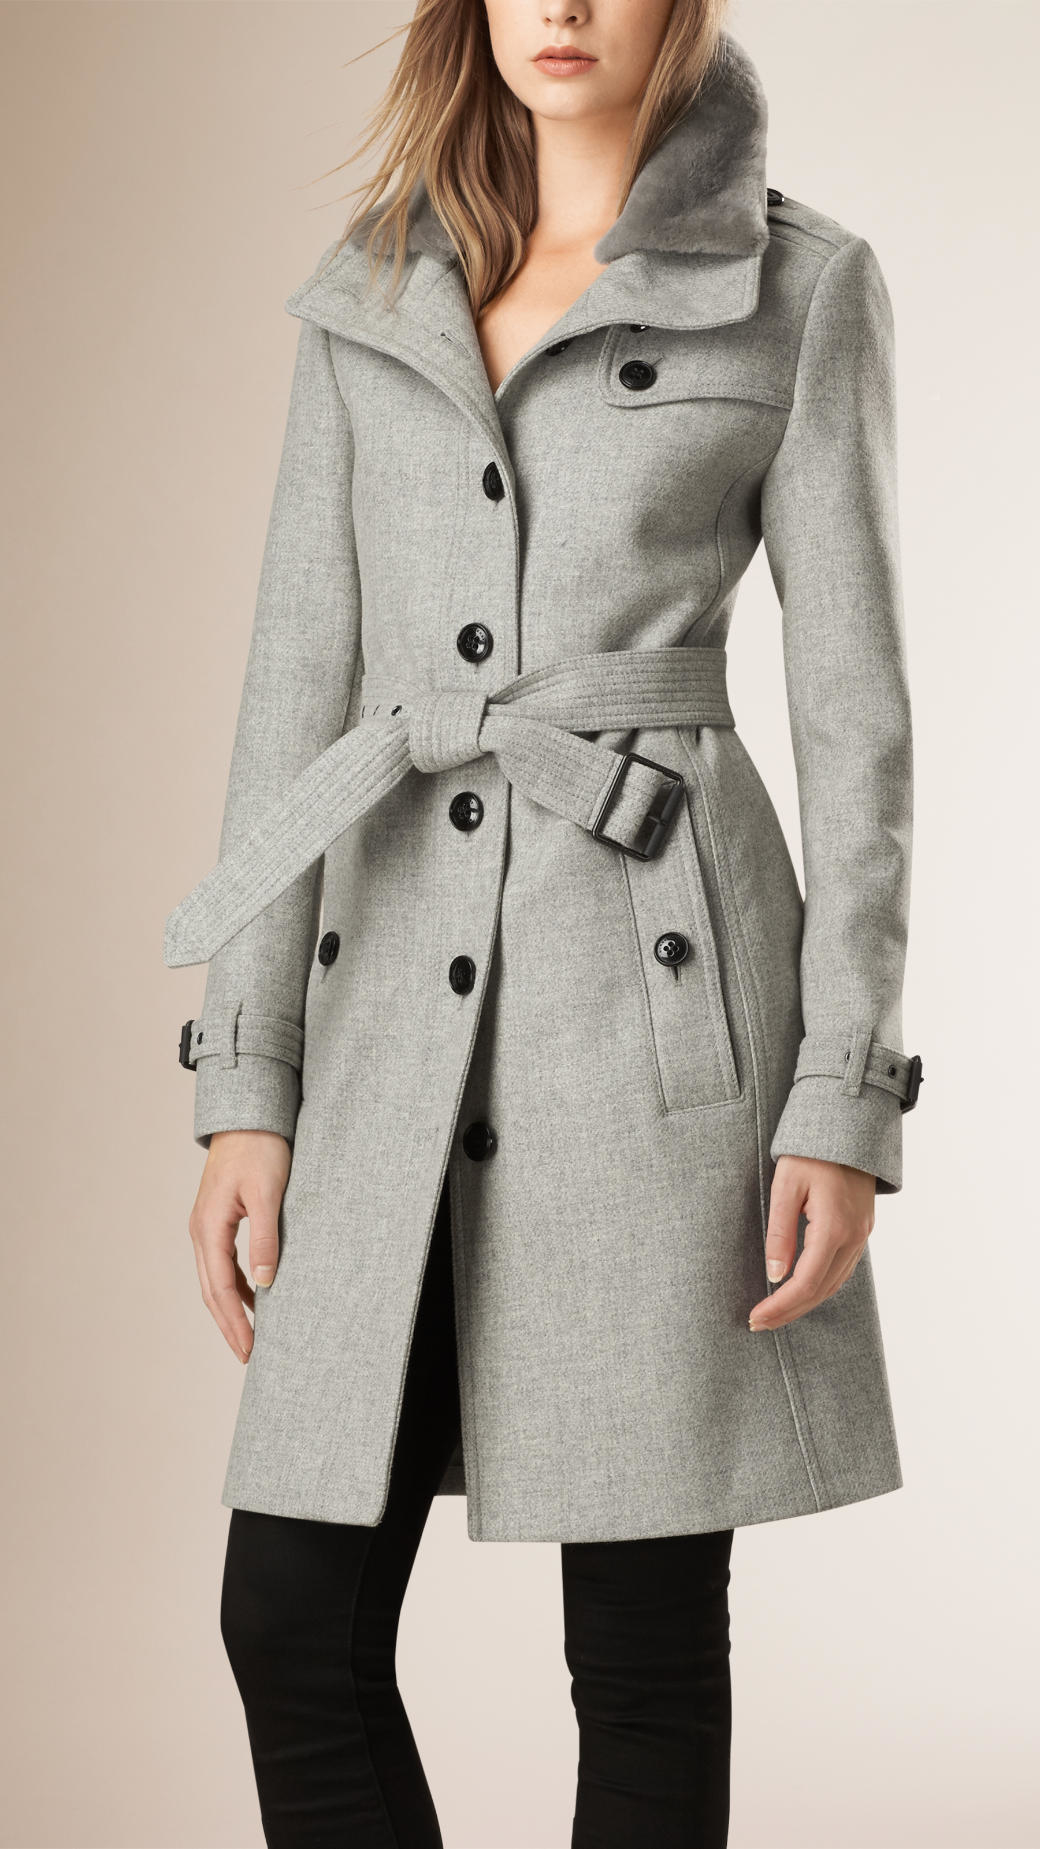 Burberry Wool Blend Trench Coat With Shearling Collar in Pale Grey Melange  (Gray) - Lyst